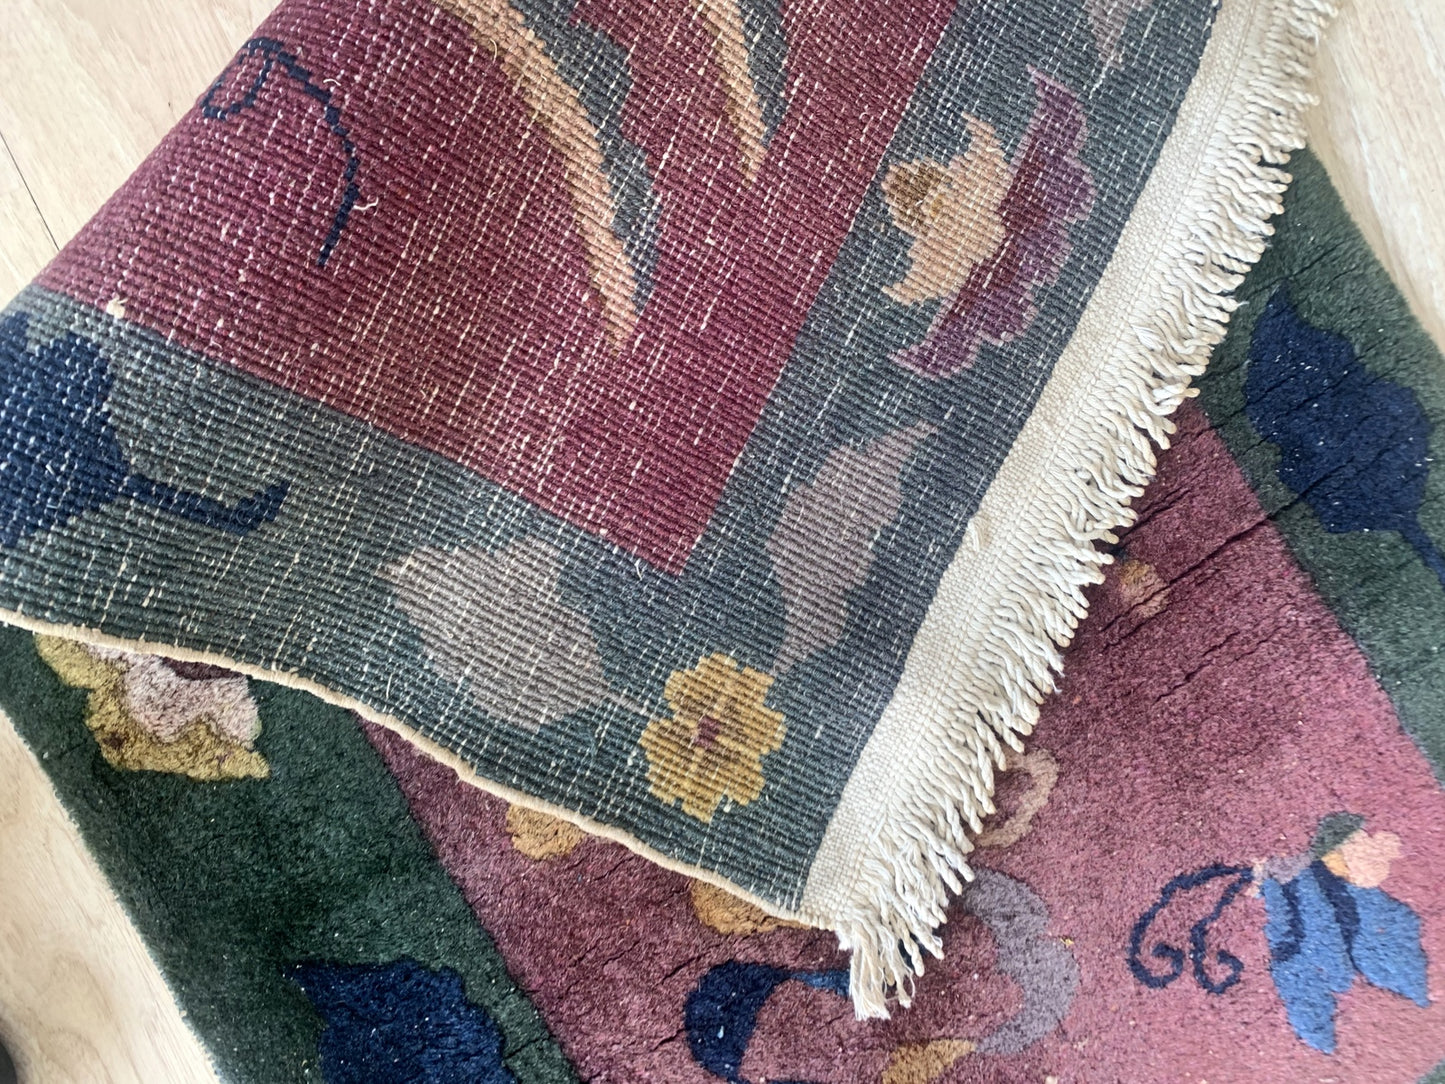 Reverse side of the handmade Chinese rug